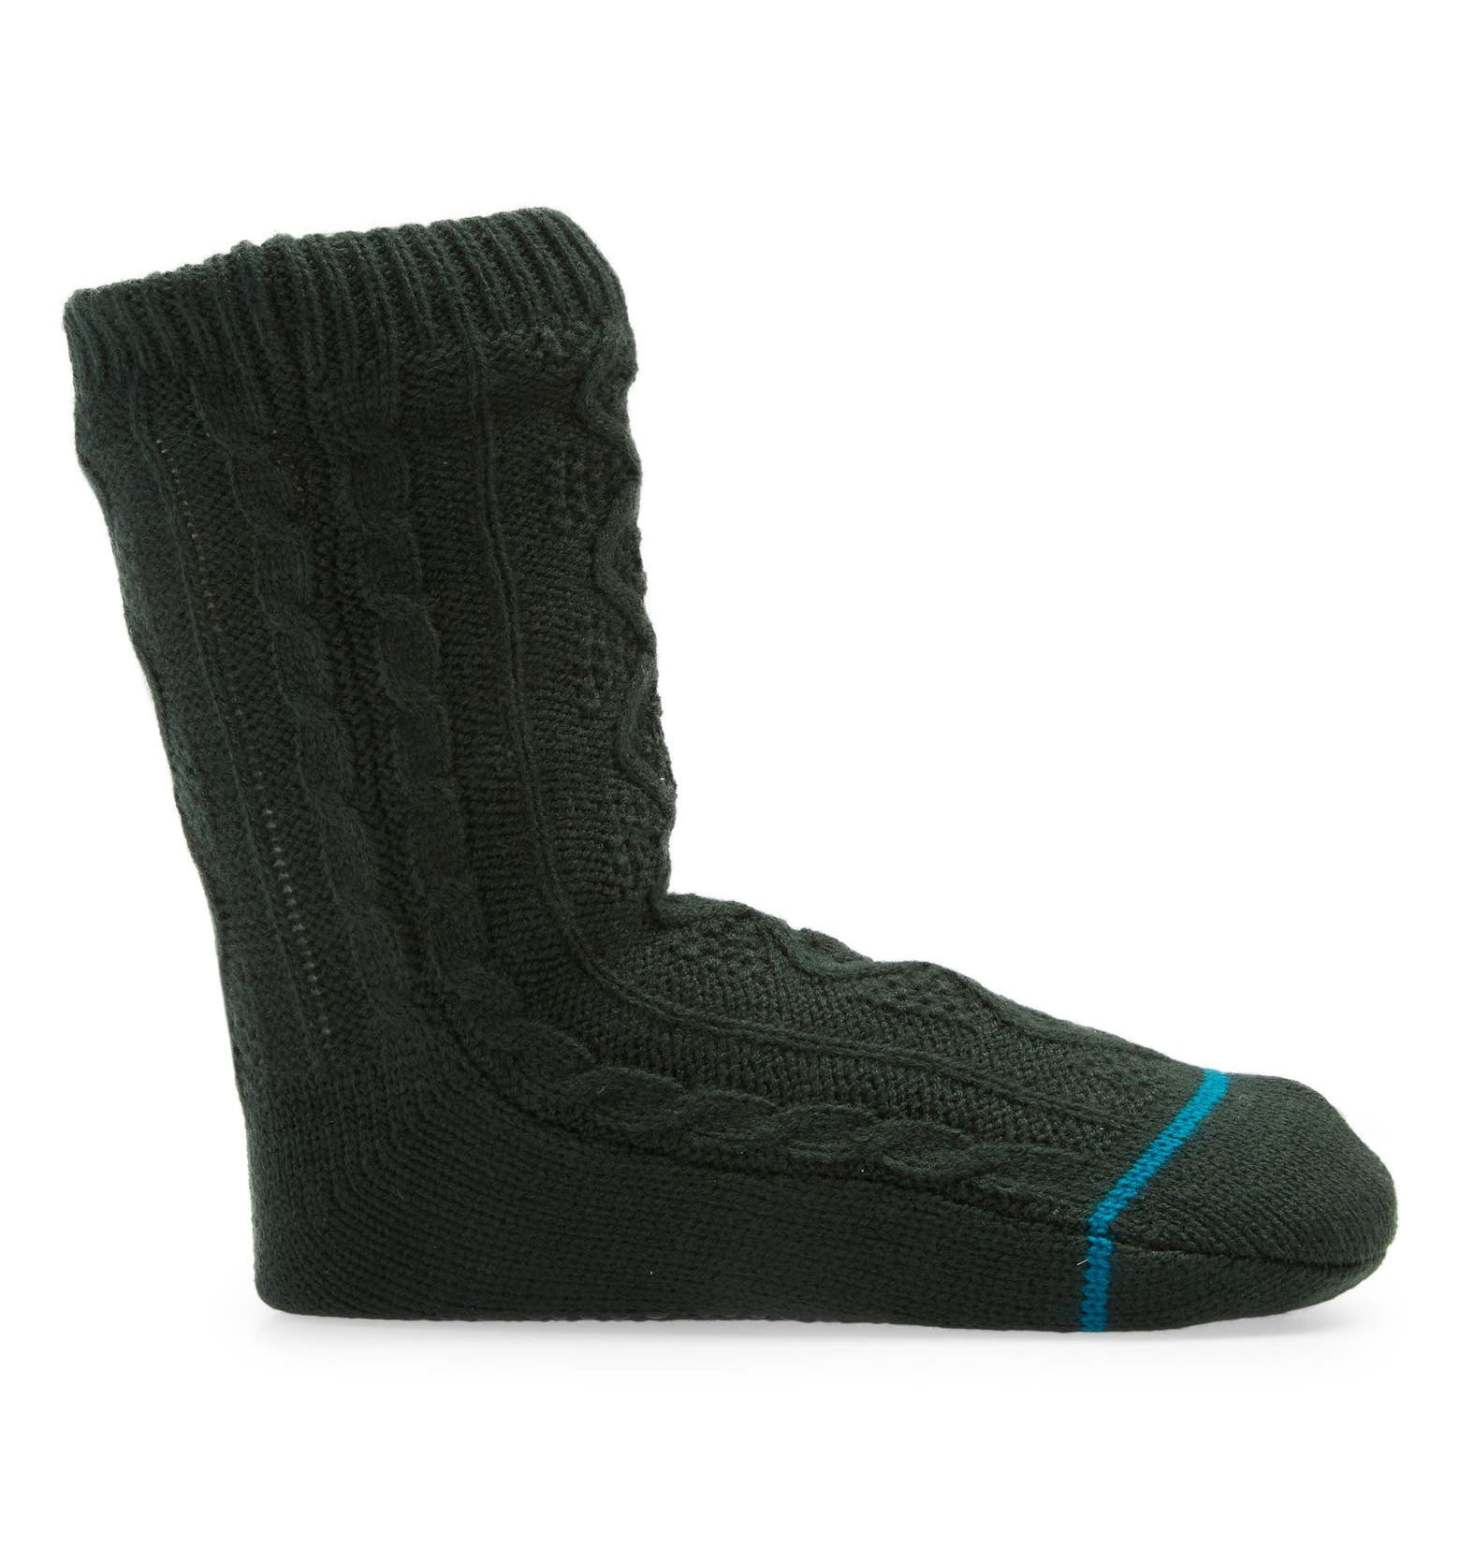 Stance Roasted Cable Knit Slipper Socks